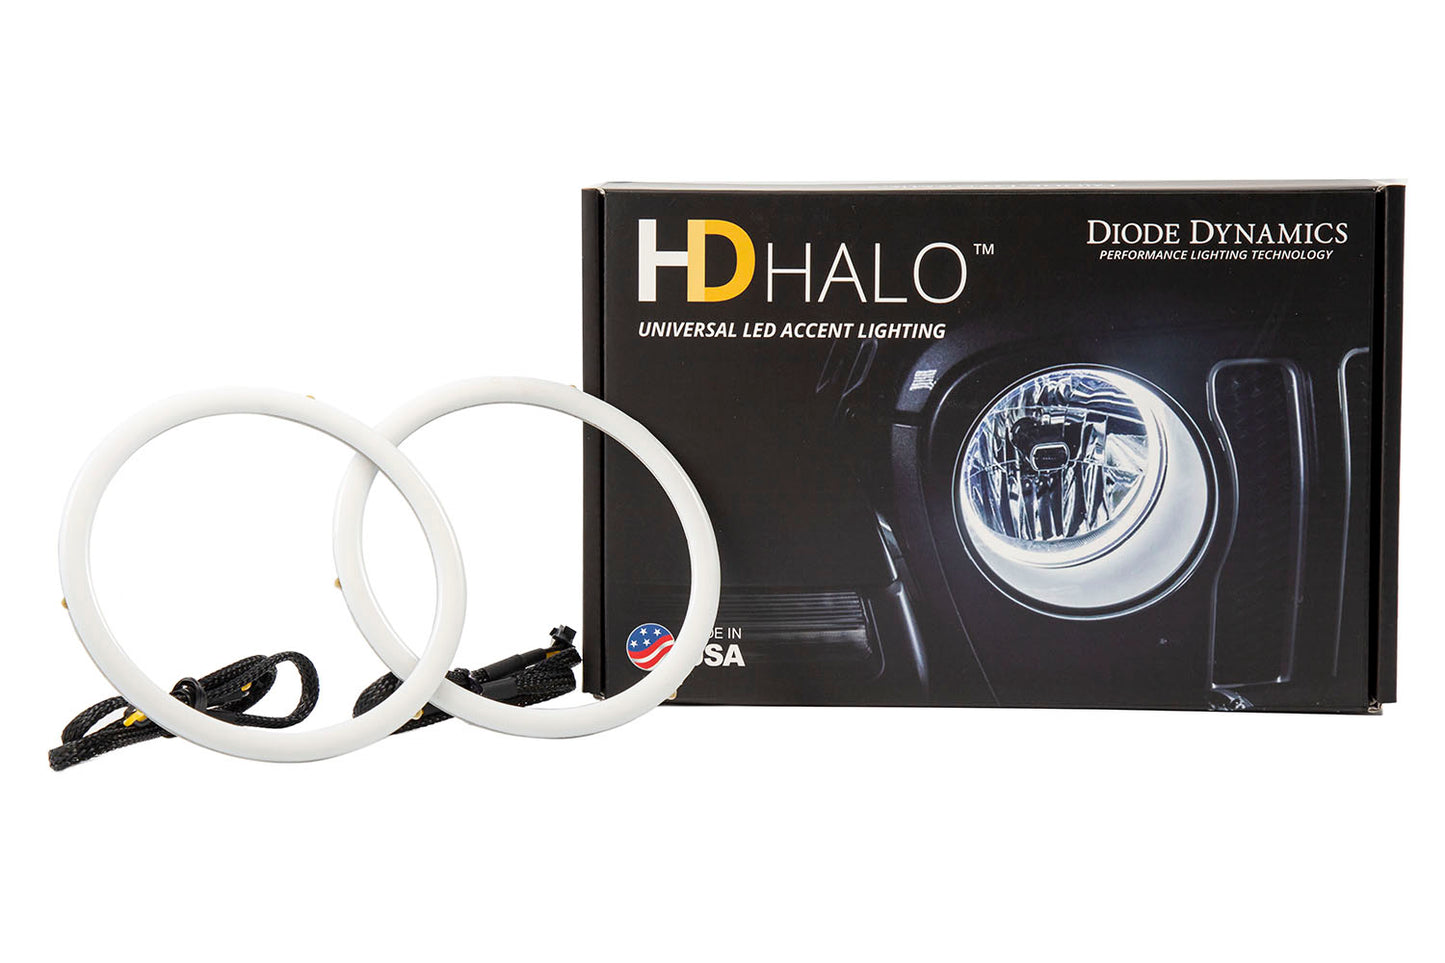 Halo Lights LED 60mm Switchback Pair Diode Dynamics